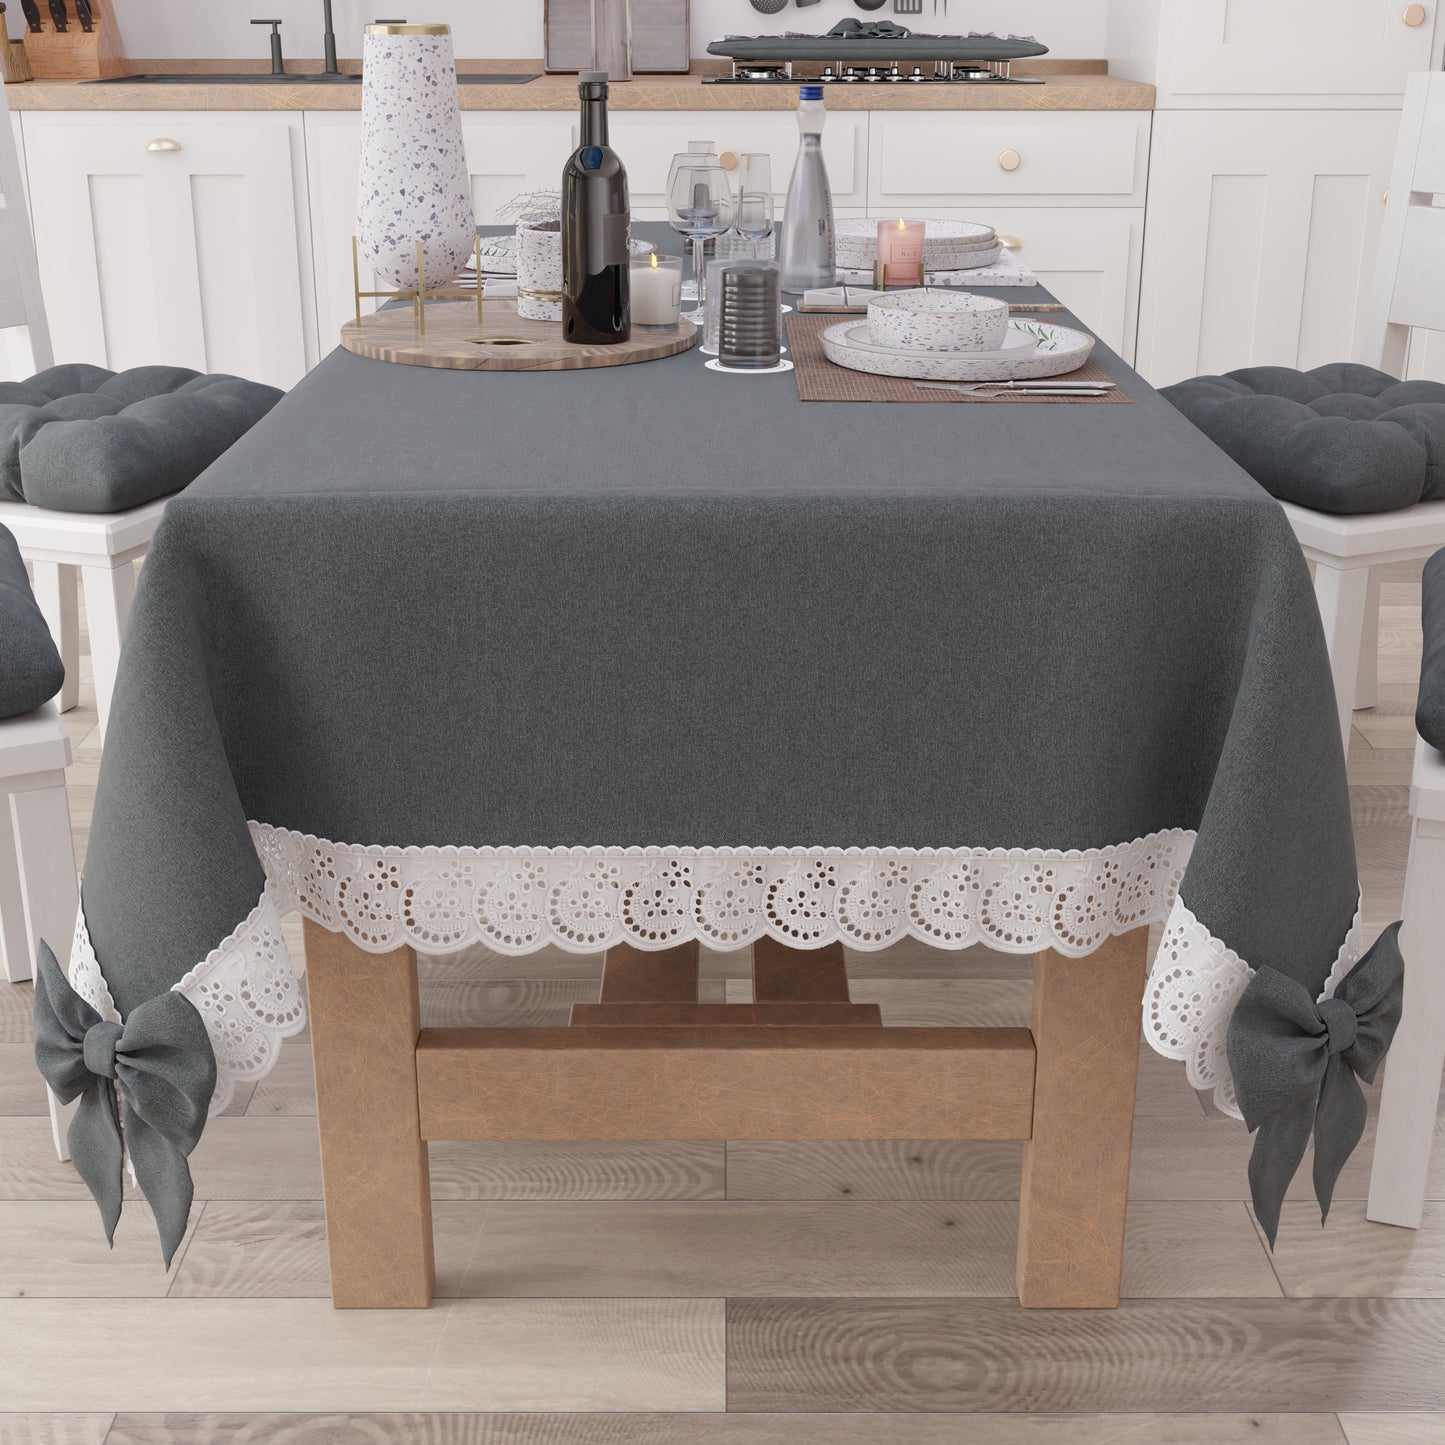 Shabby Chic Tablecloth Table Cover with Lace and Dark Gray Bows